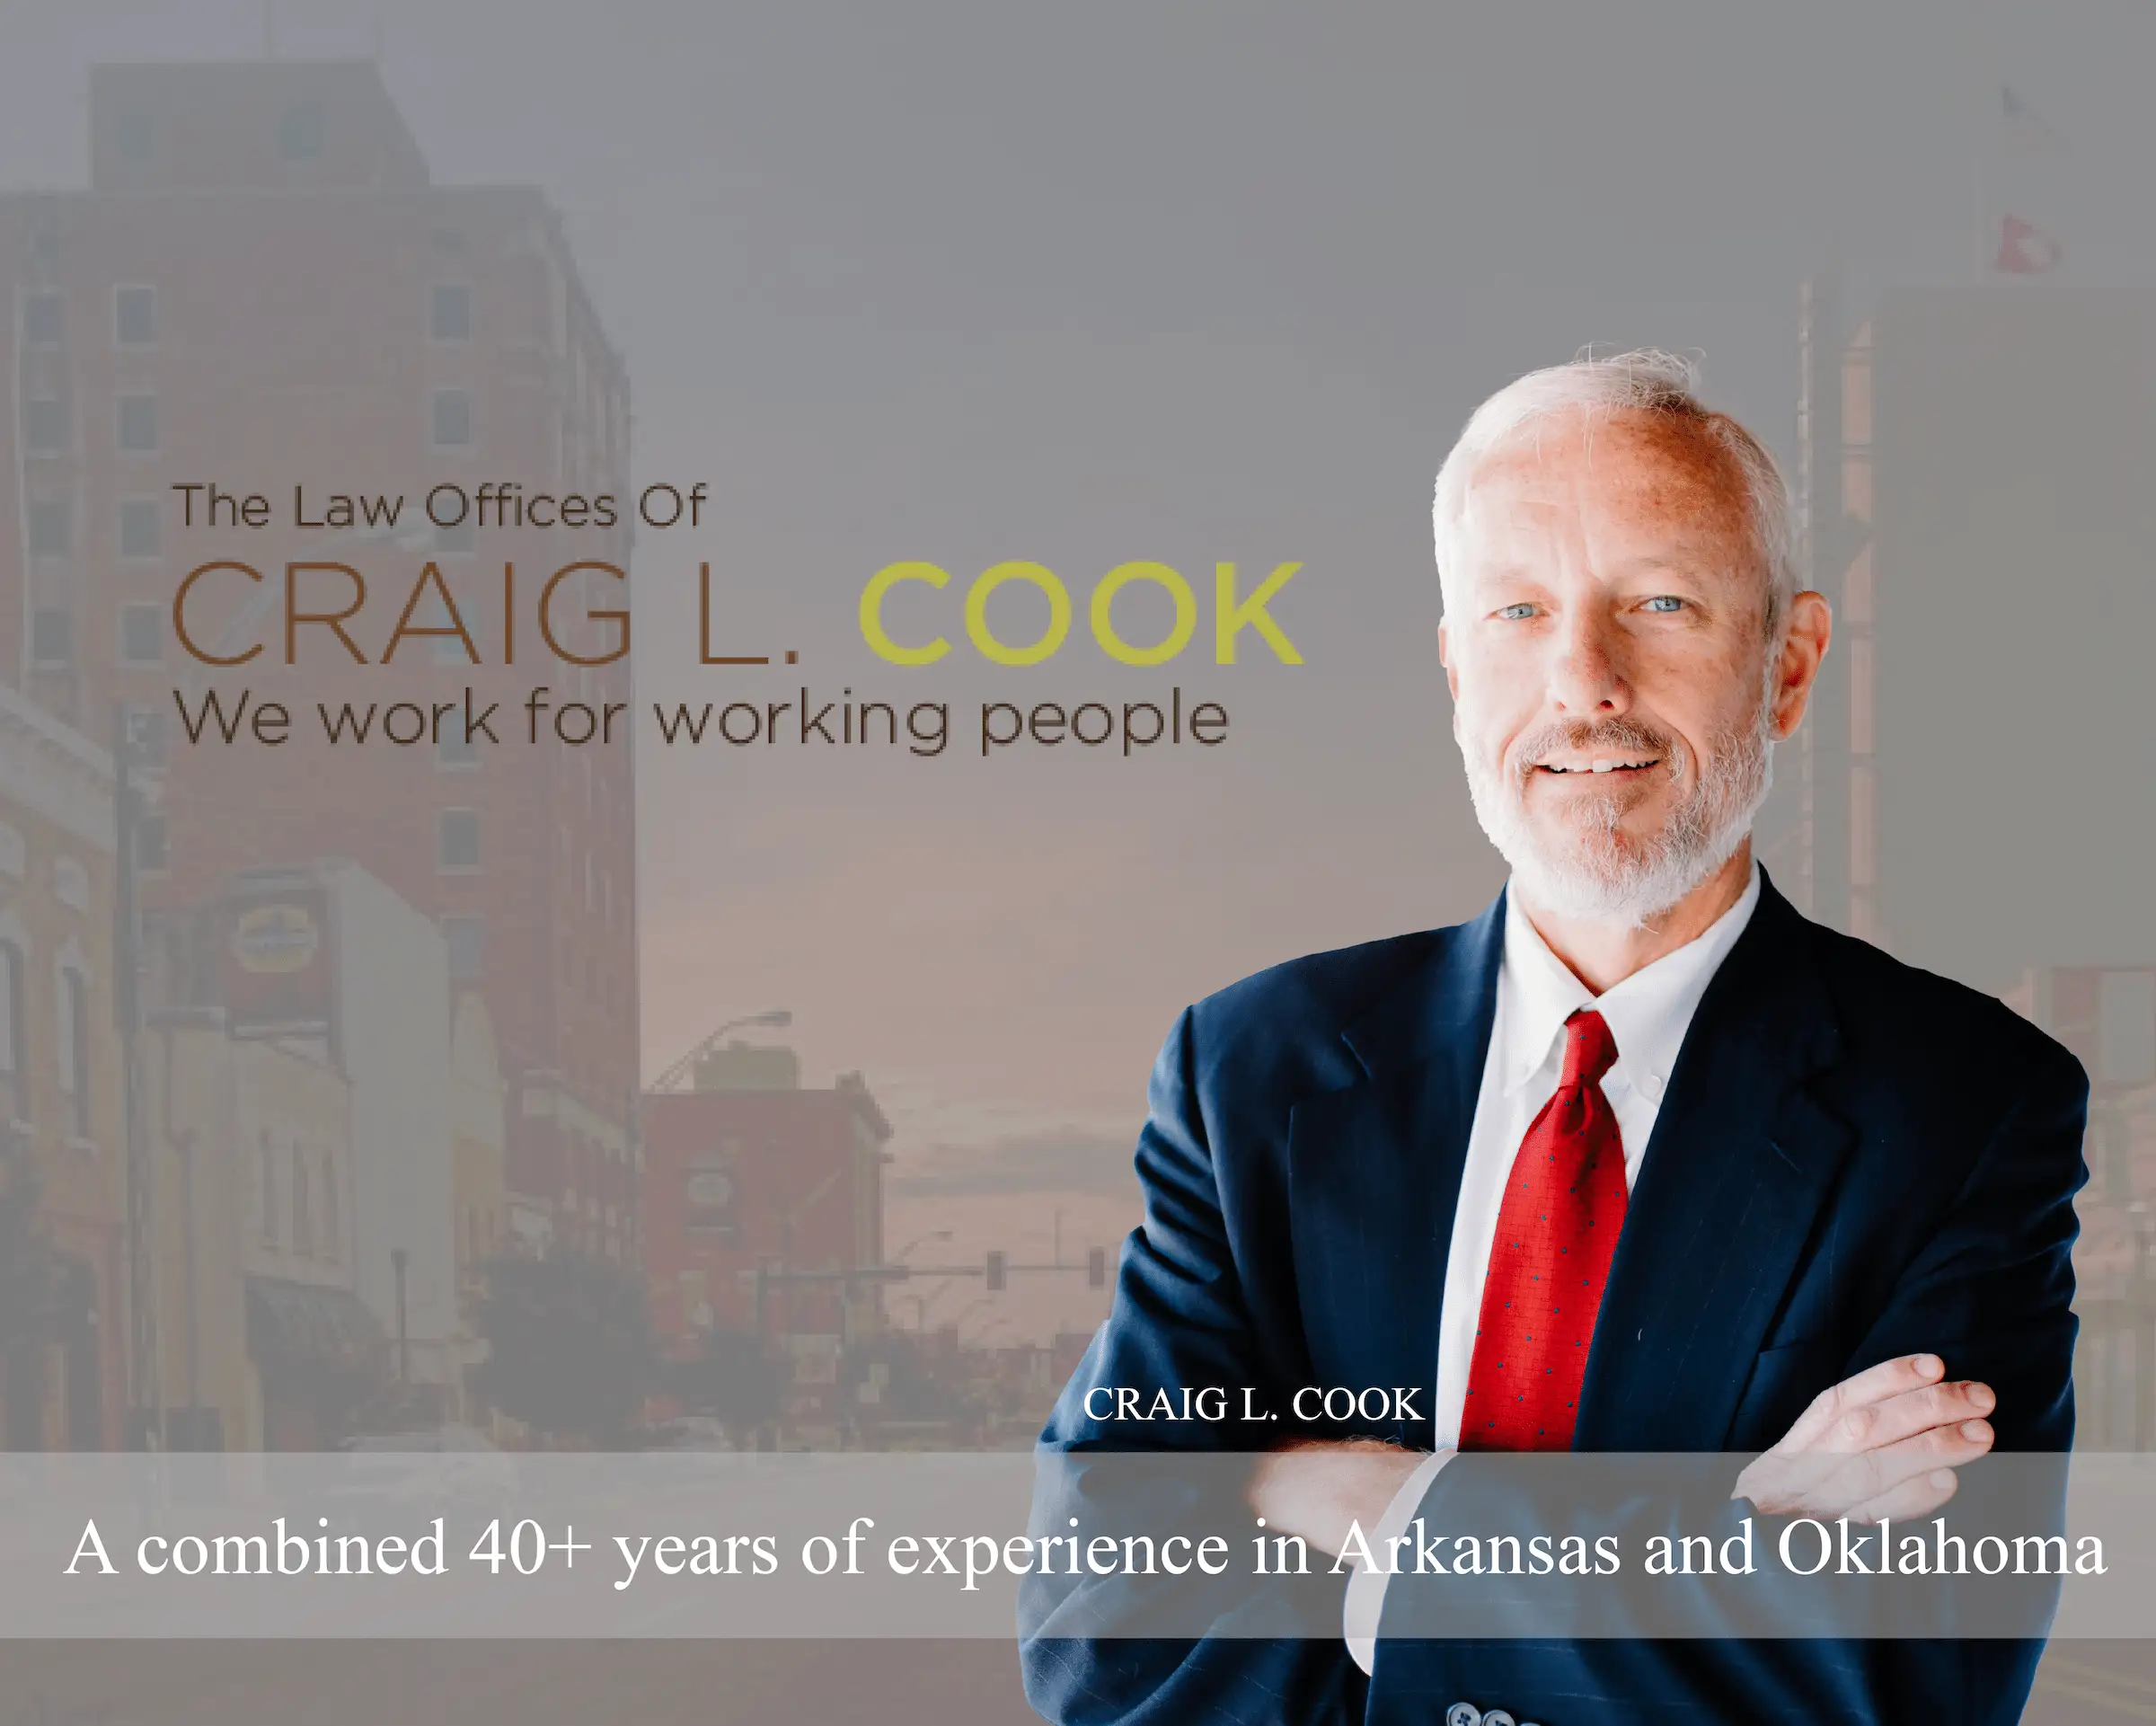 Craig Cook has 40 years of experience in Arkansas and Oklahoma.